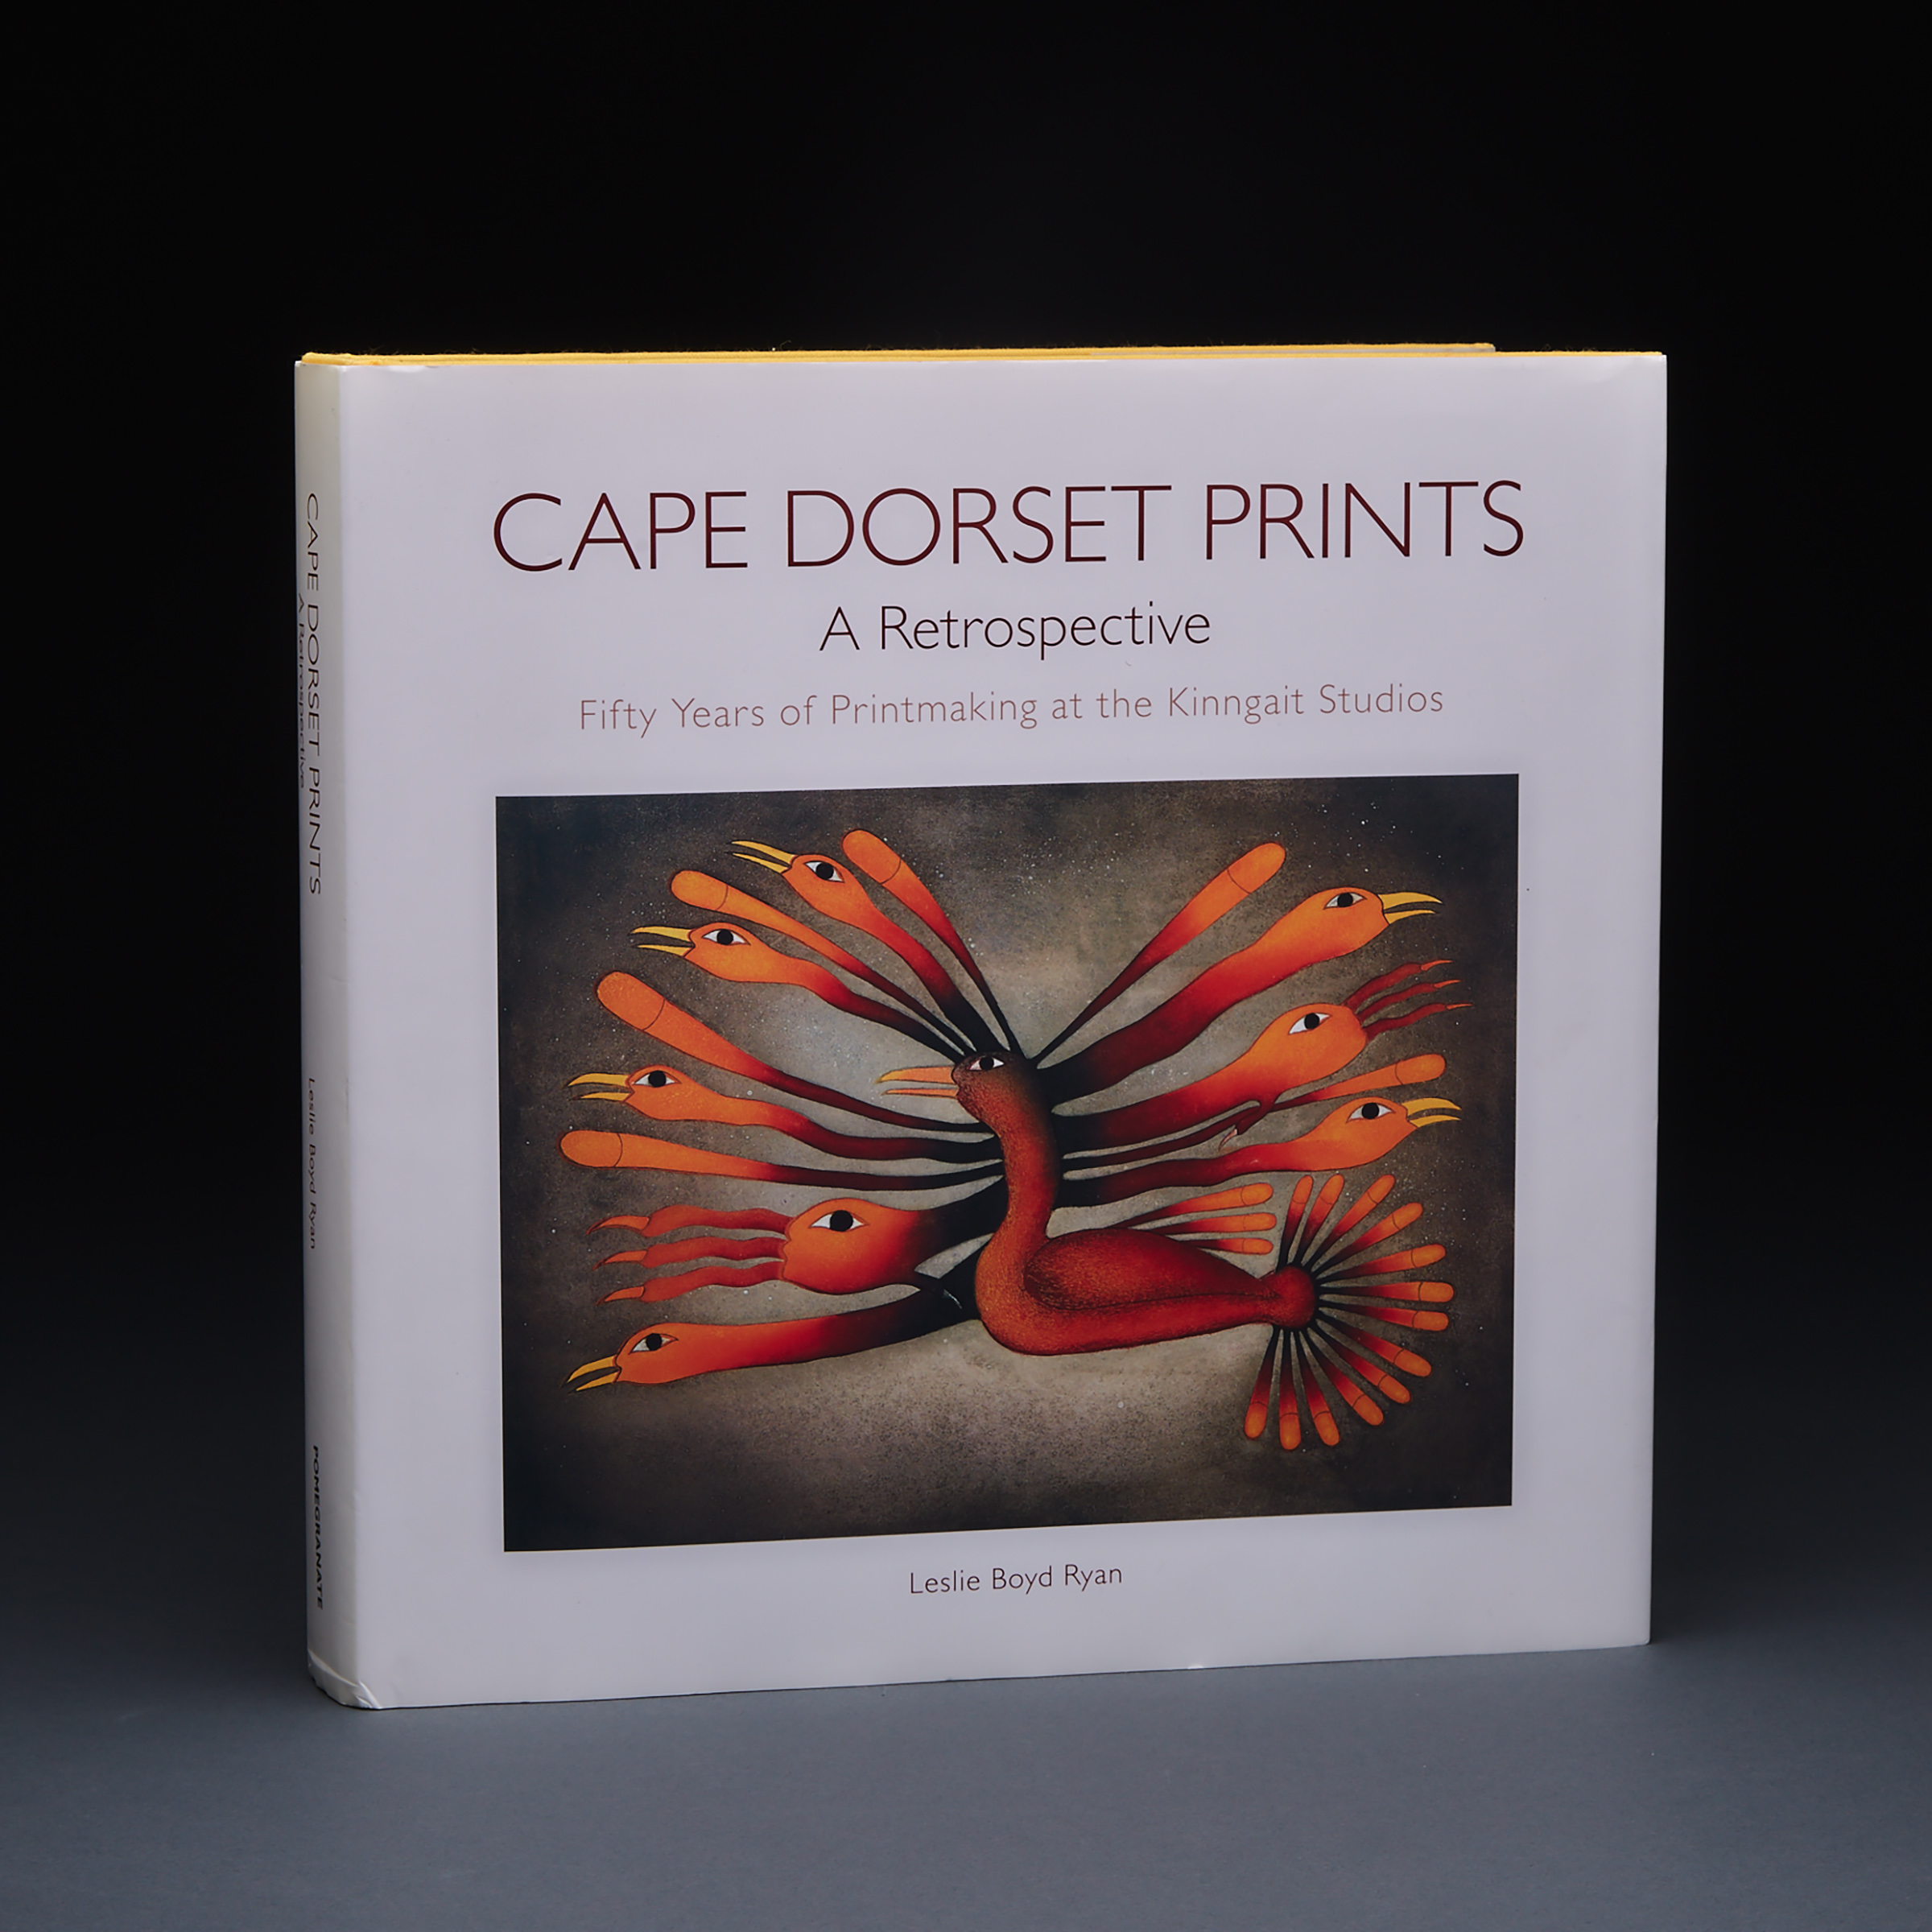 CAPE DORSET PRINTS, A RETROSPECTIVE, FIFTY YEARS OF PRINTMAKING AT THE KINNGAIT STUDIOS